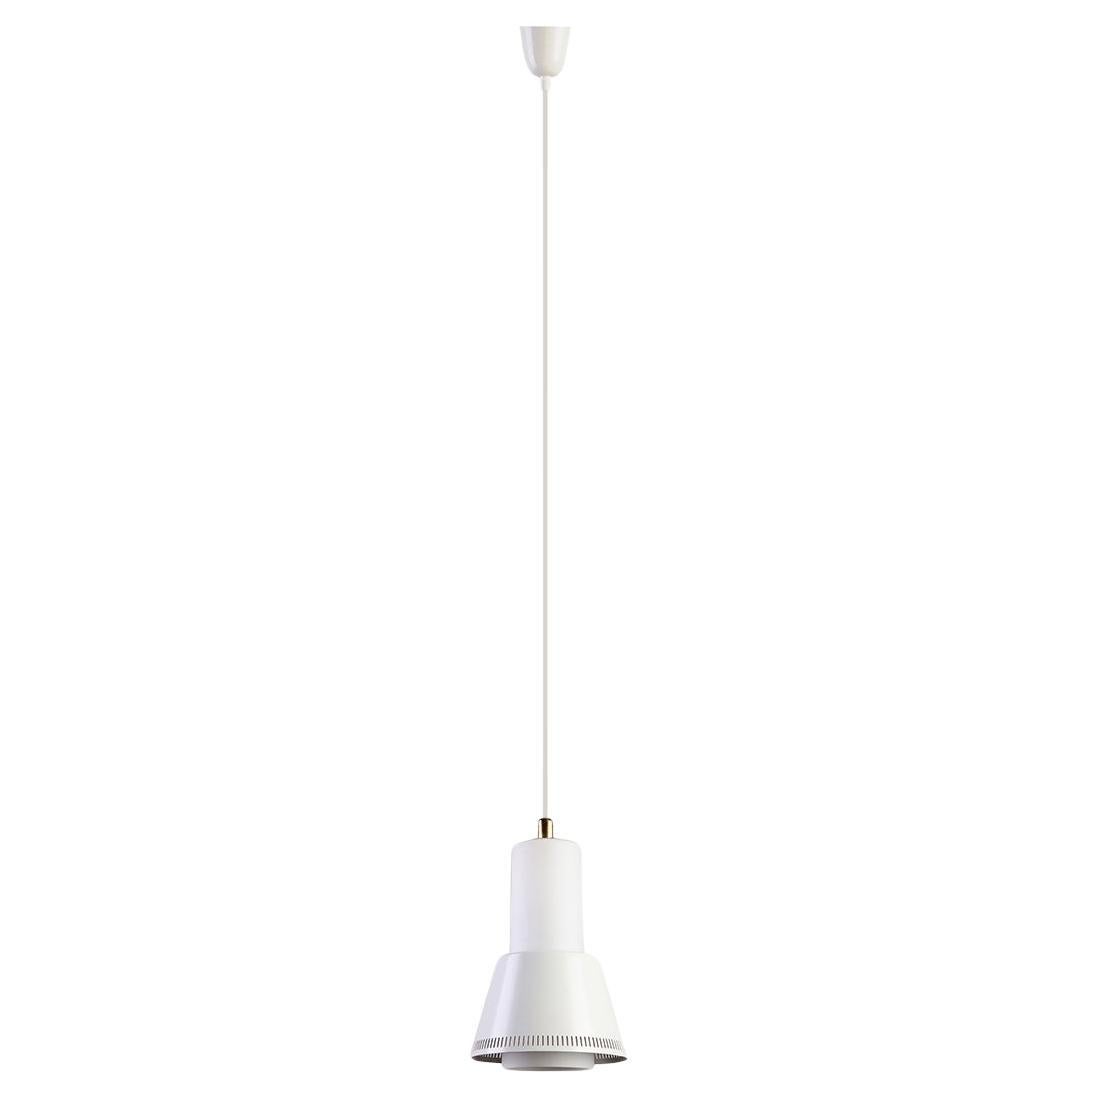 Paavo Tynell for Idman “K2-15” Pendant Lamp in Steel and Opal Glass, 1950s For Sale